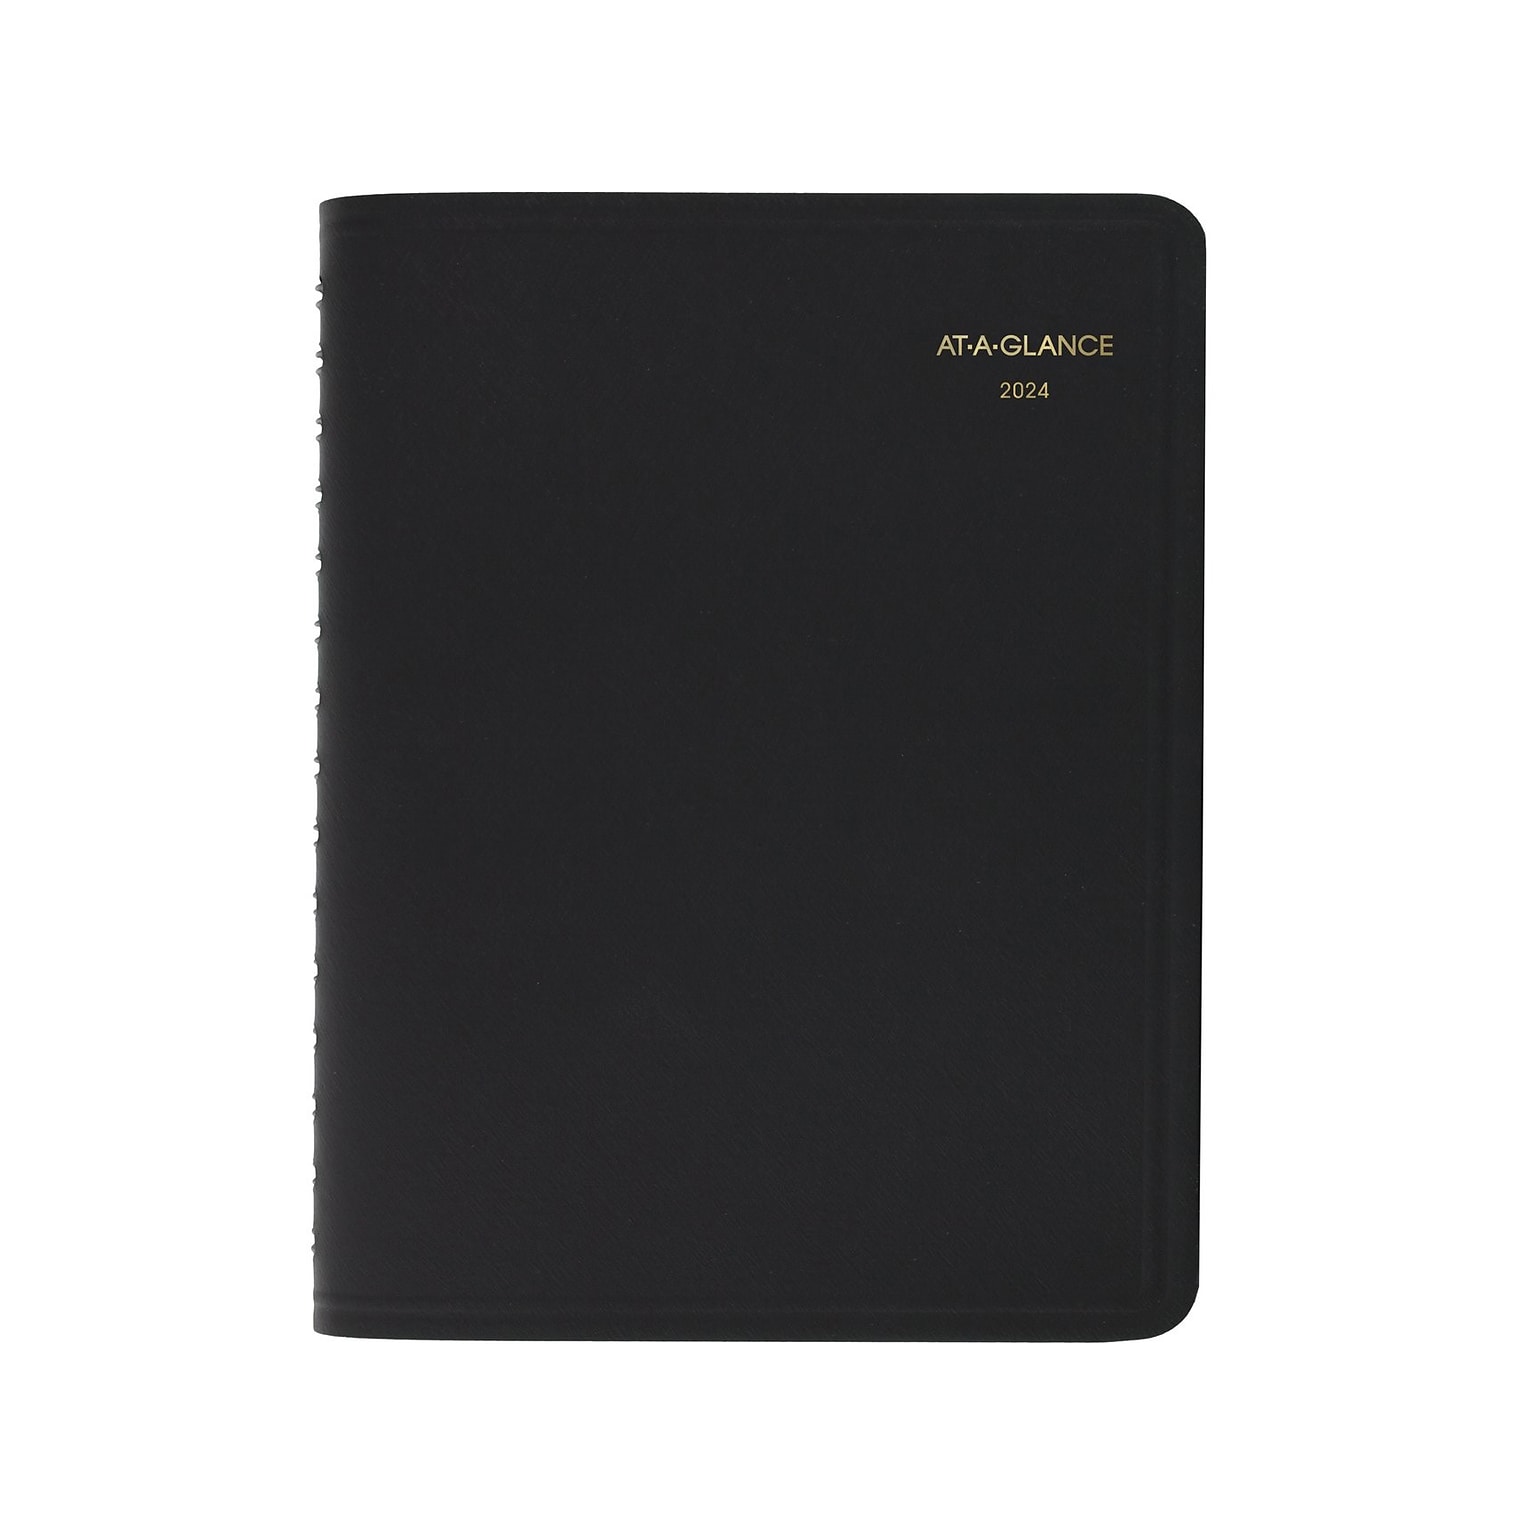 2024 AT-A-GLANCE 8 x 11 Daily Four-Person Appointment Book, Black (70-822-05-24)